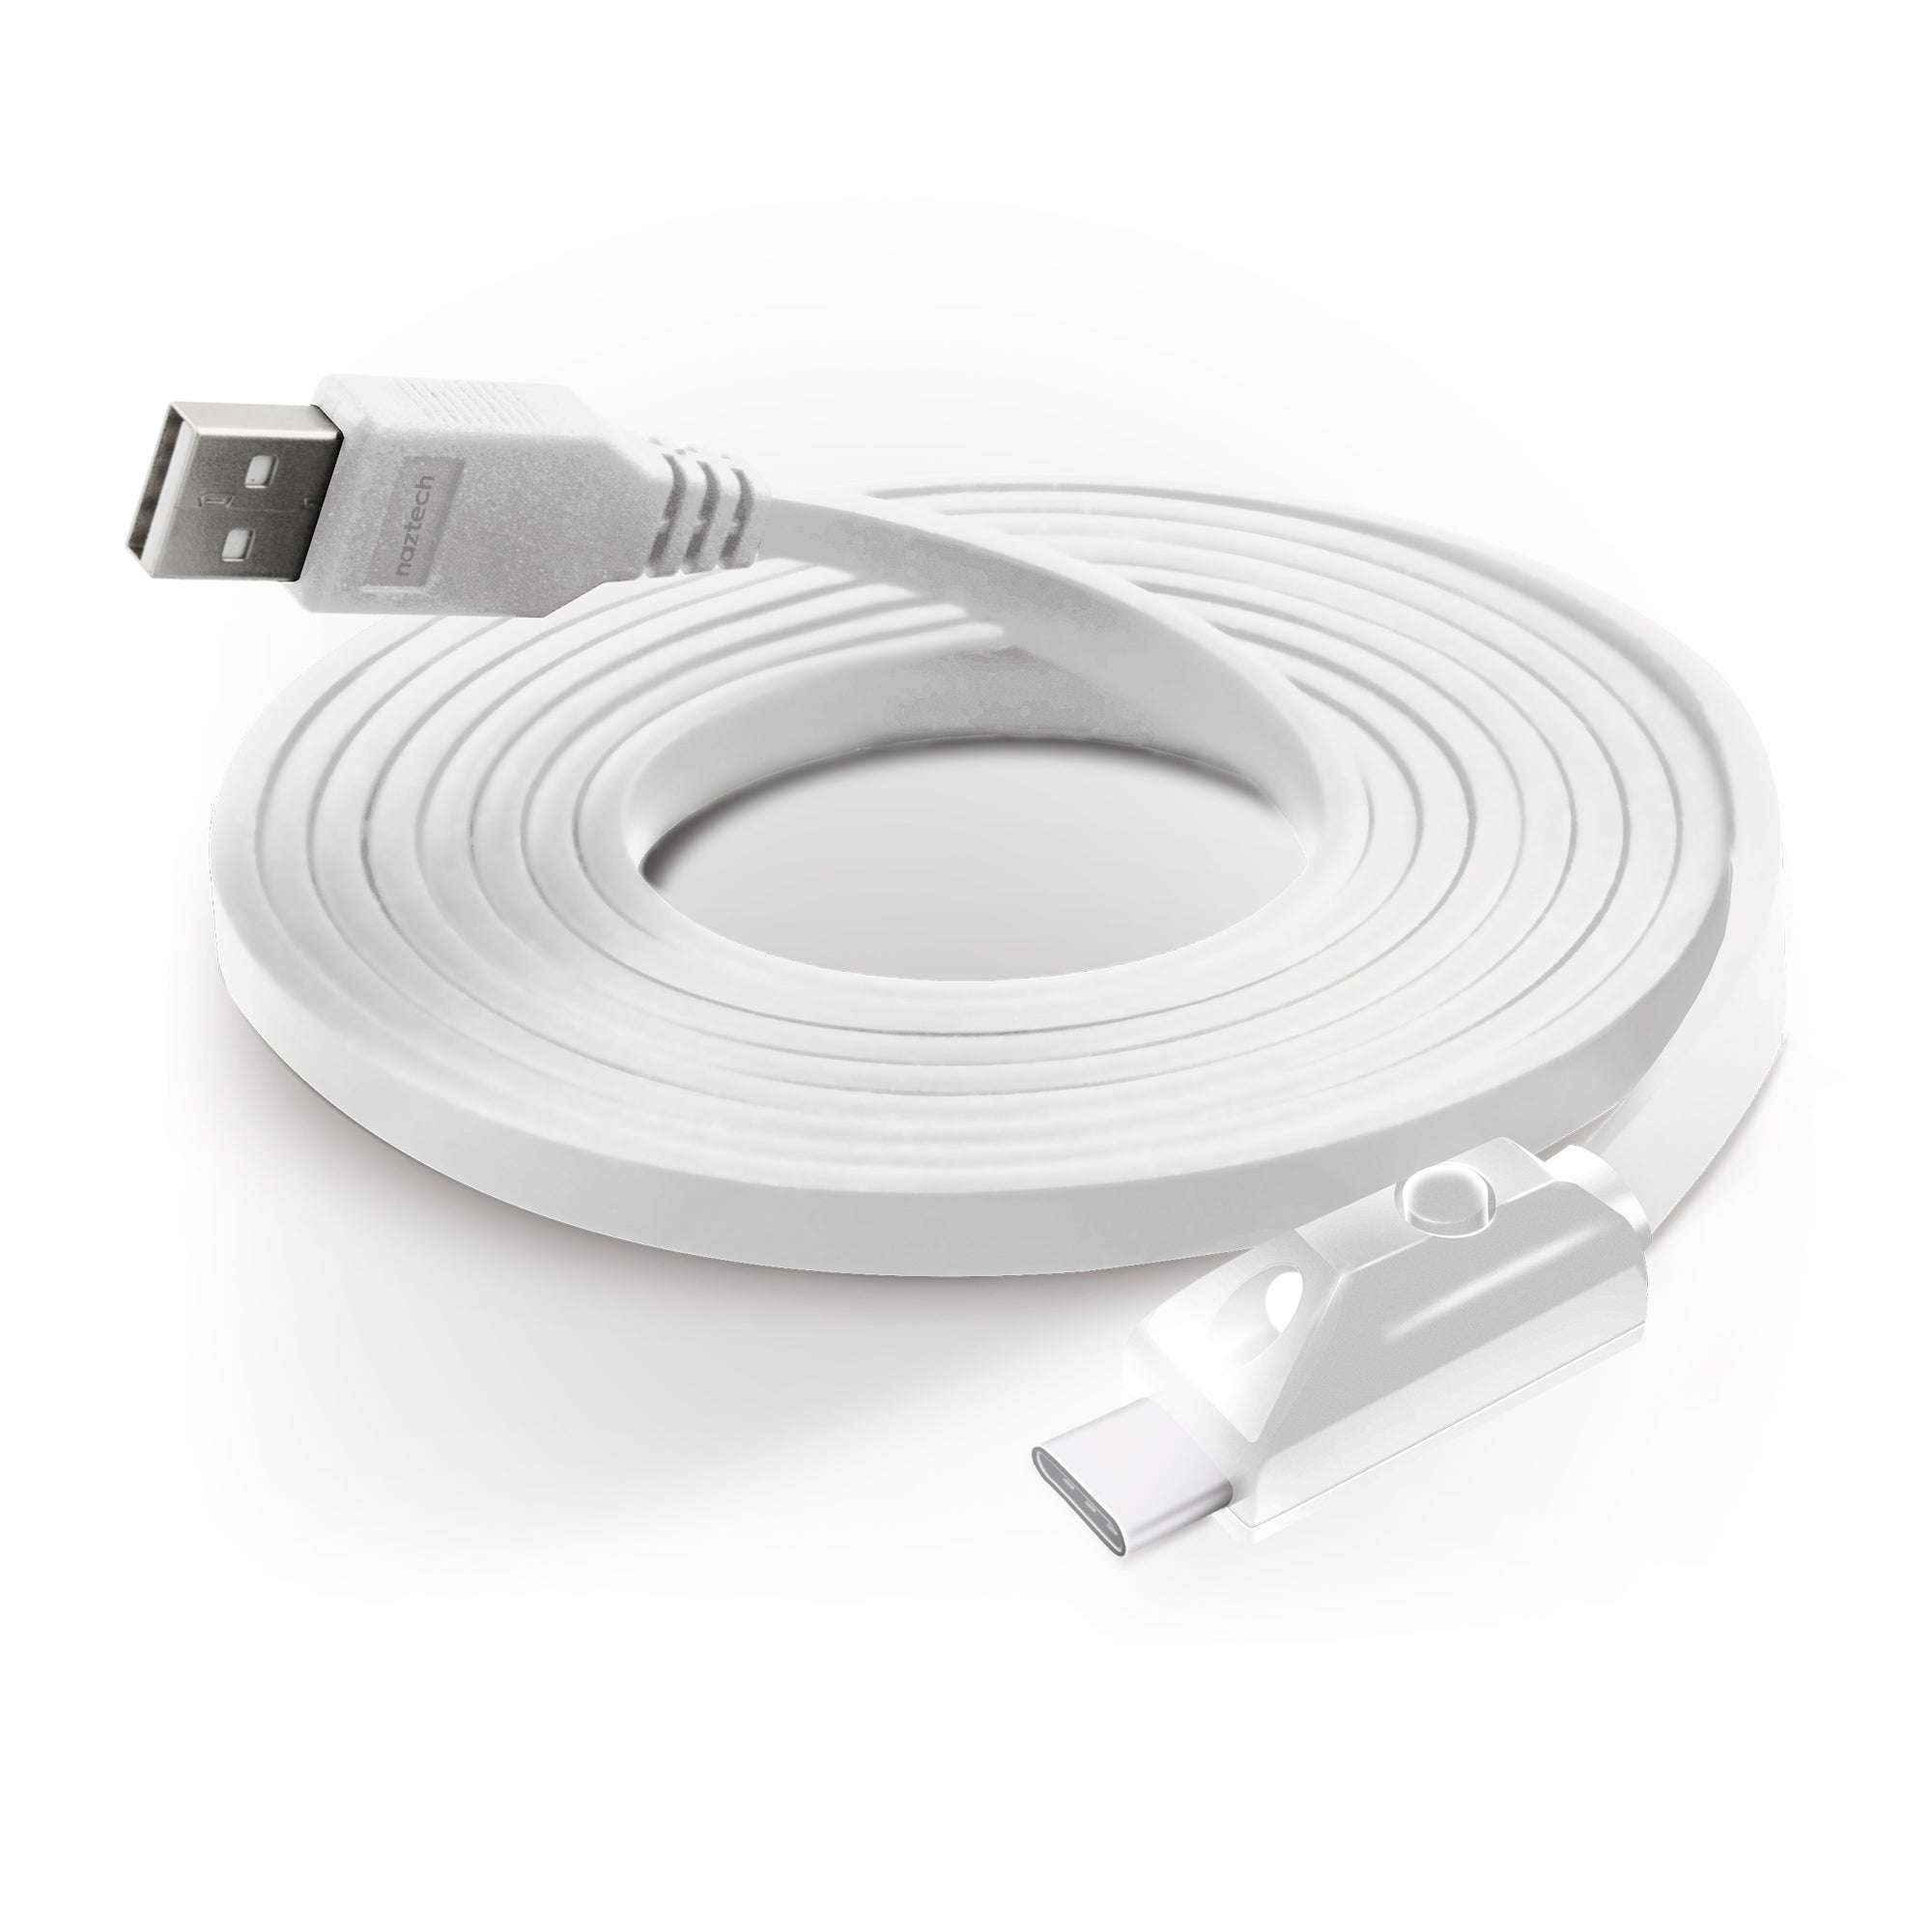 Naztech Lighted USB-C Charge & Sync Cable with Push Button Control